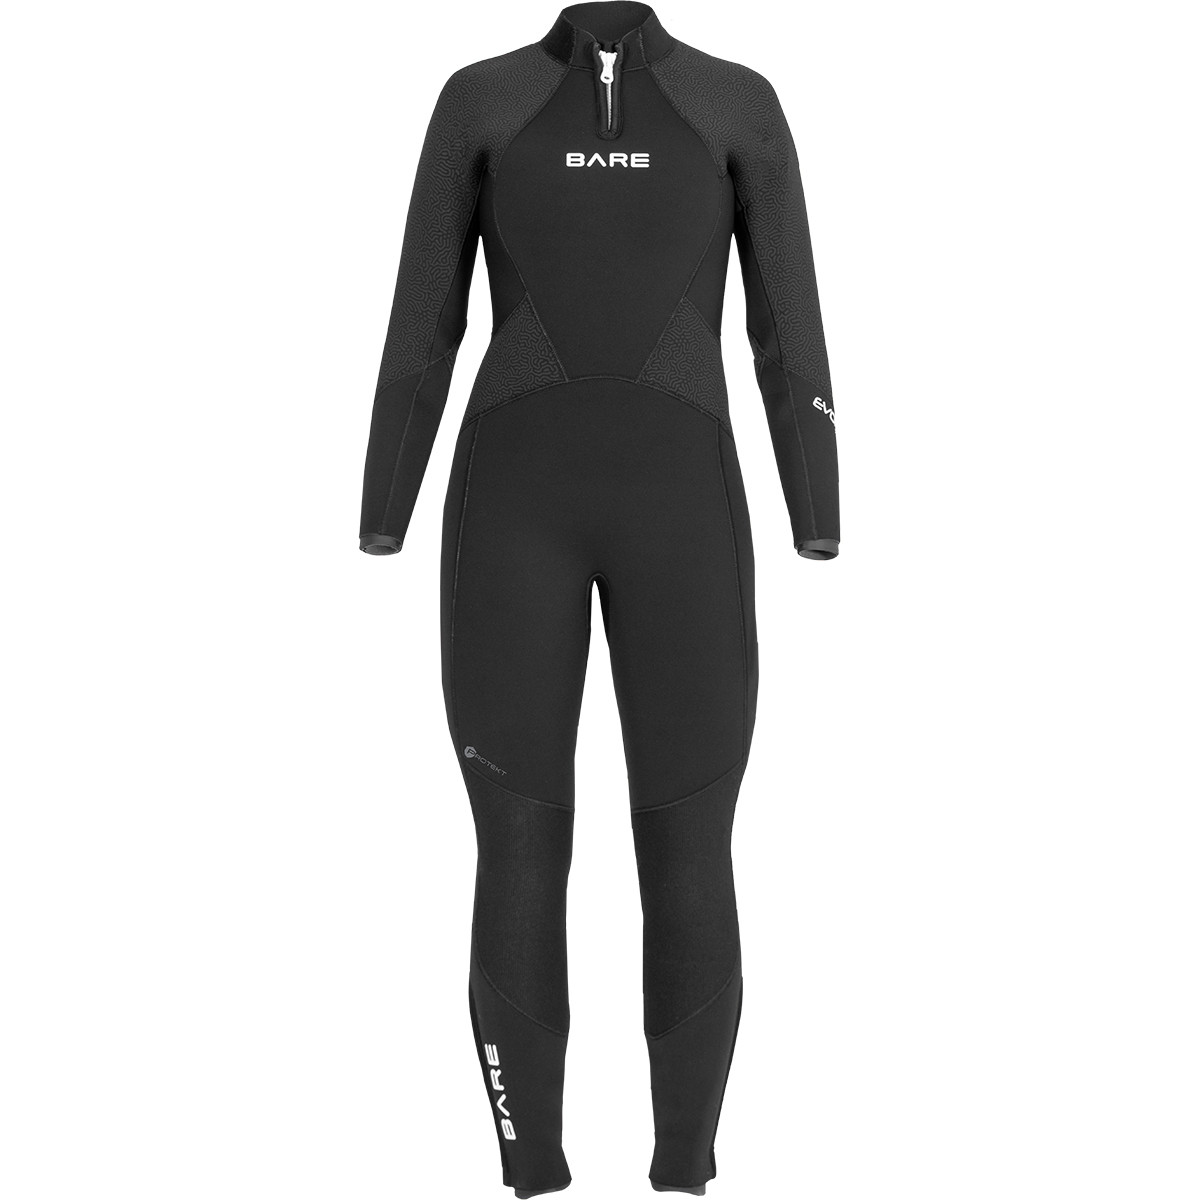 BARE Elate Wetsuit For Sale Online in Canada - Dan's Dive Shop